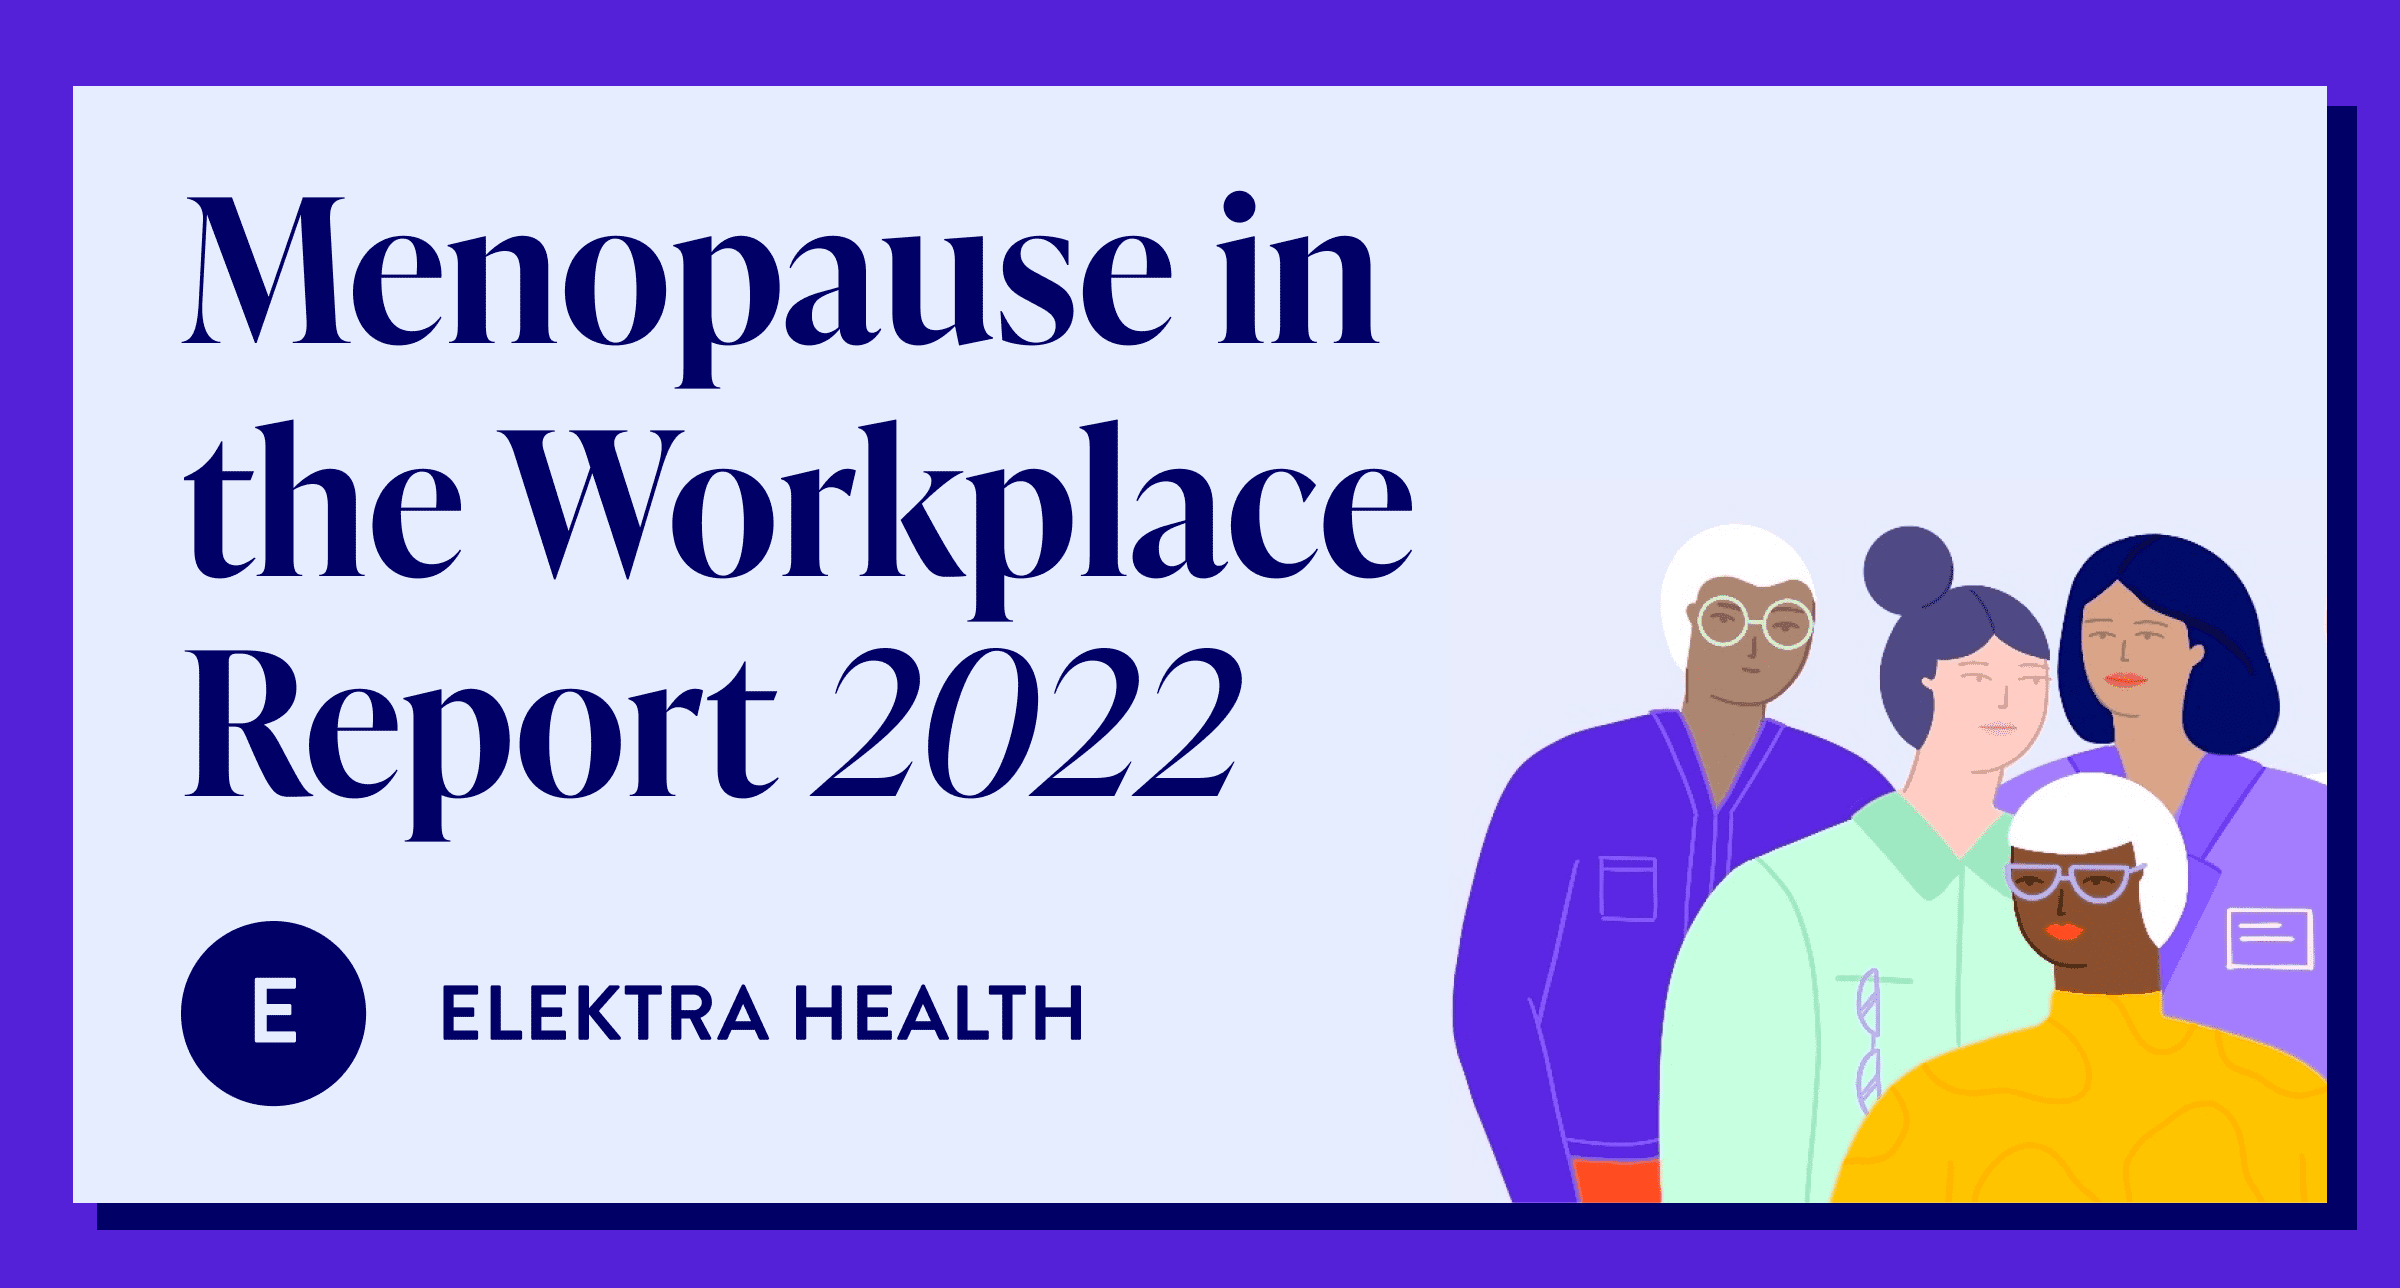 Elektra Health's Annual Menopause in the Workplace Report (2022)